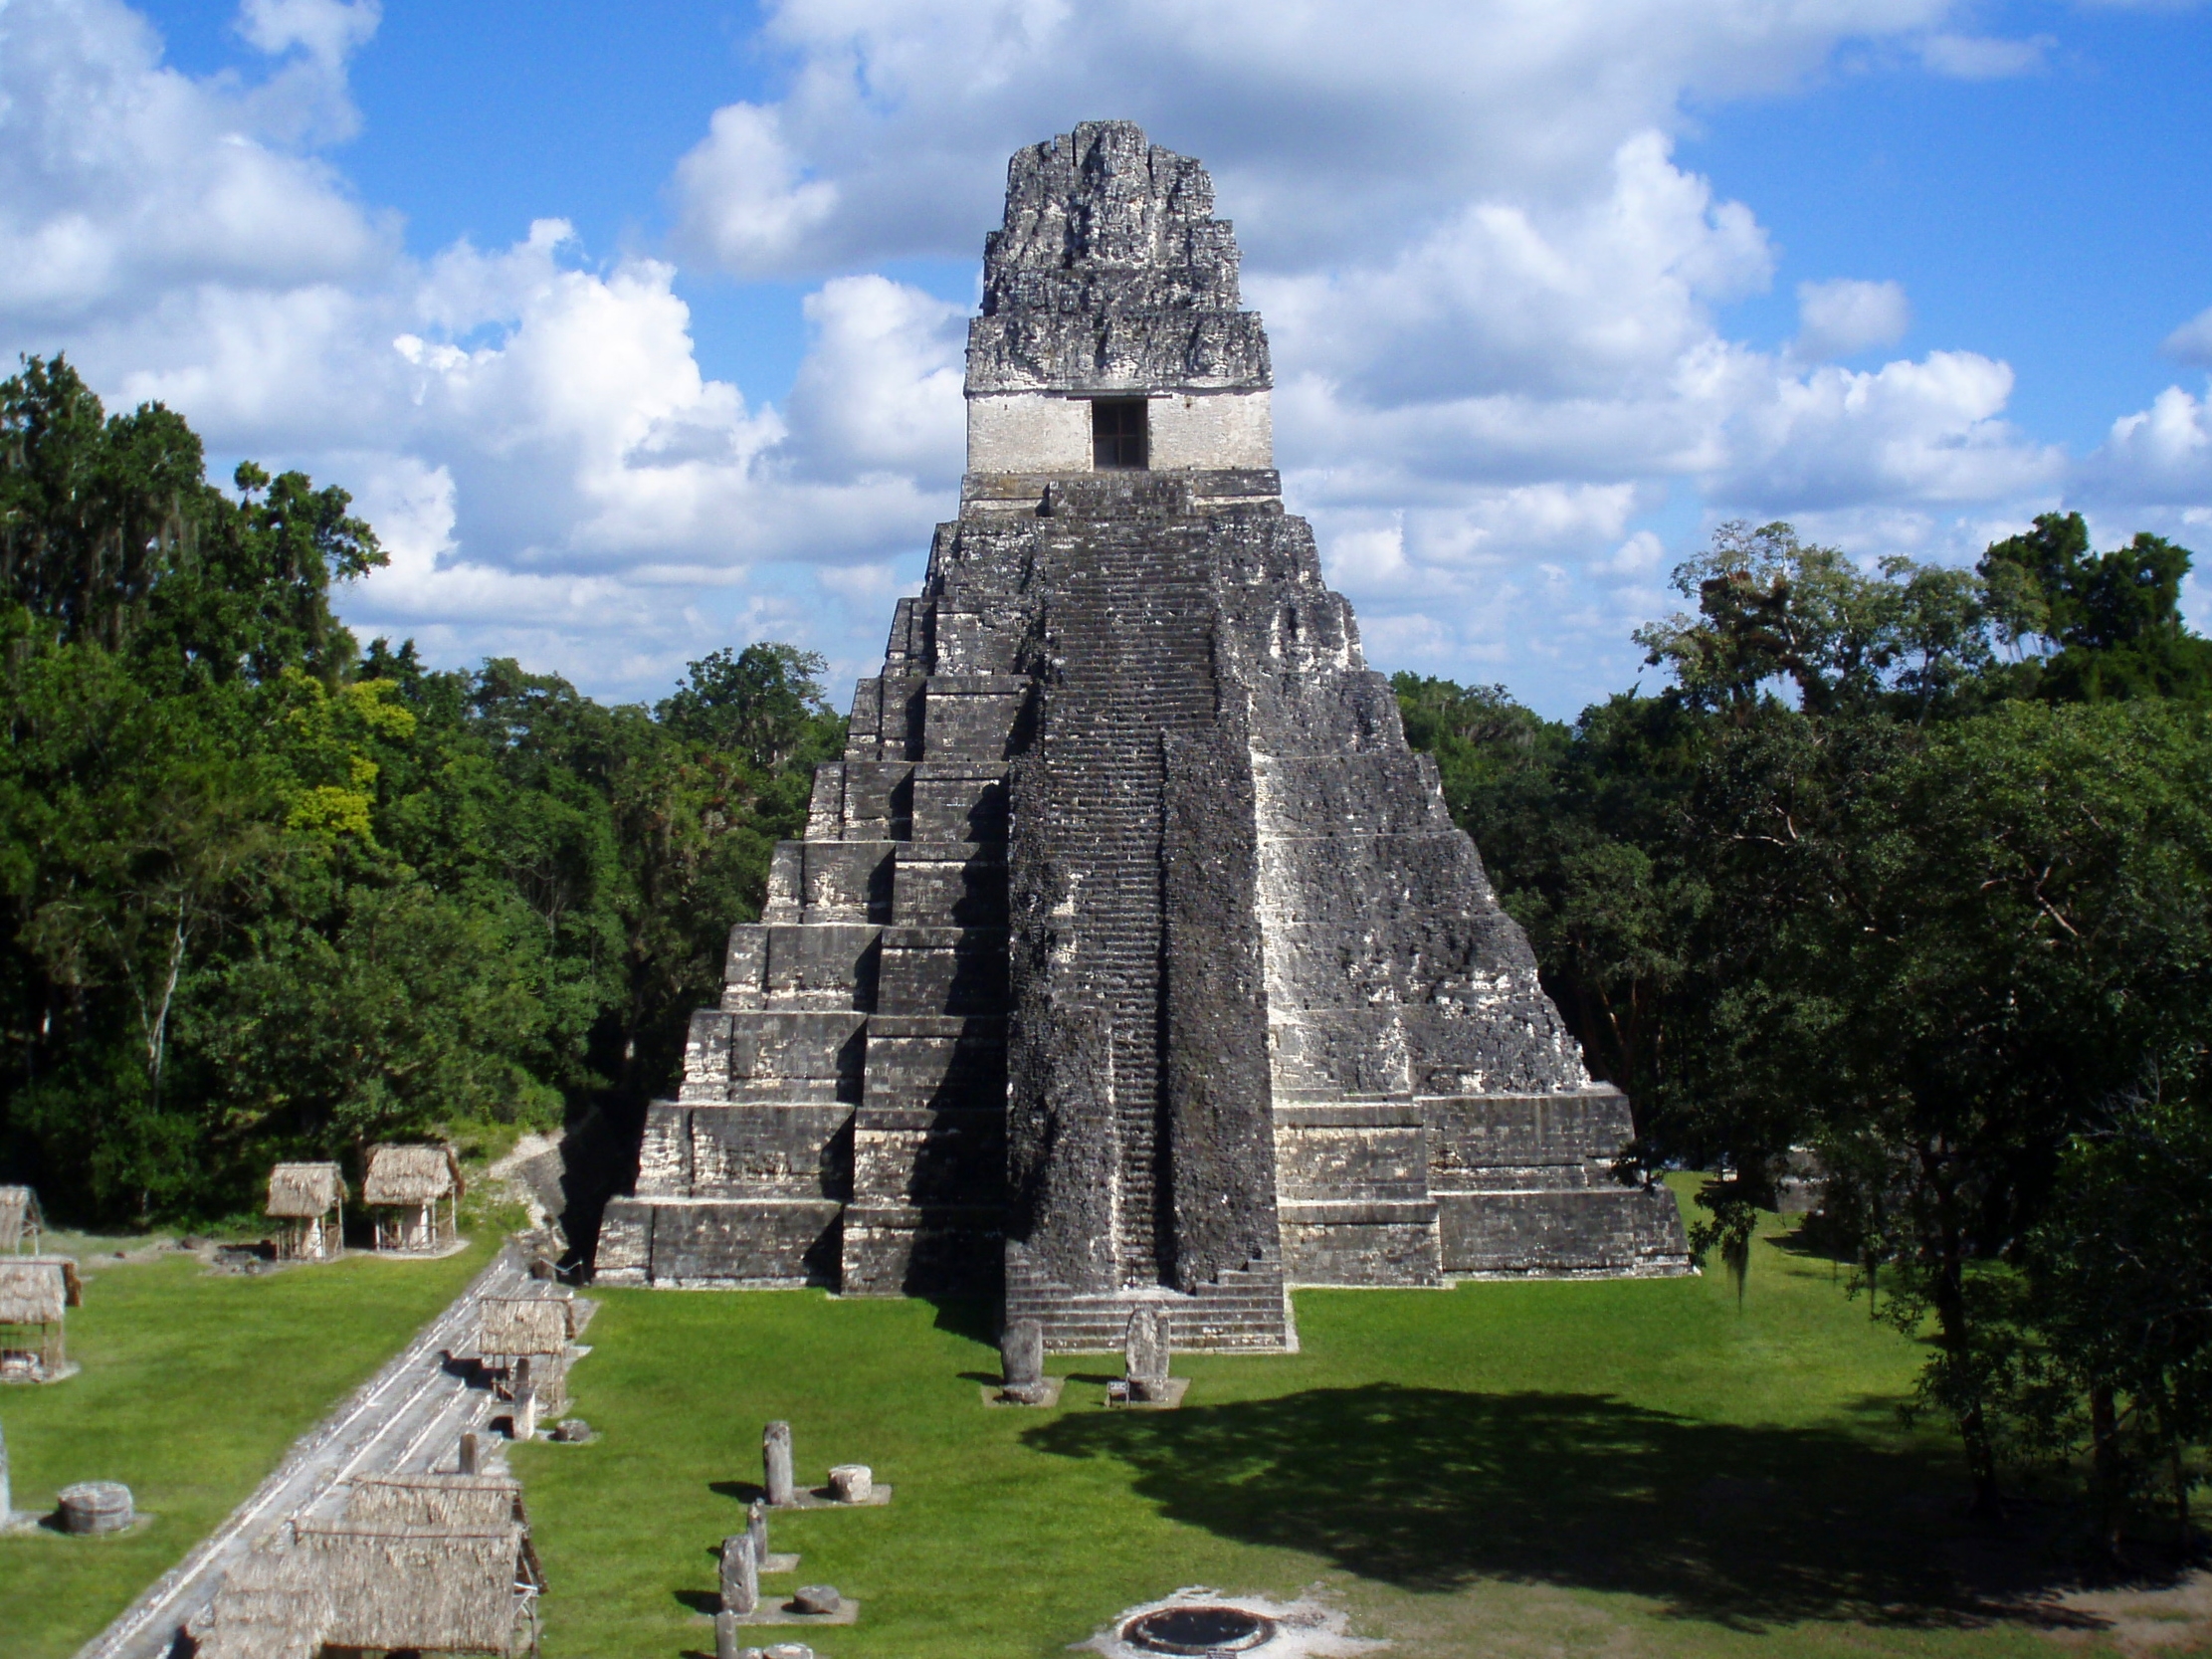 Temple I or the Temple of the Jaguar dominates the Central Acropolis at Tikal